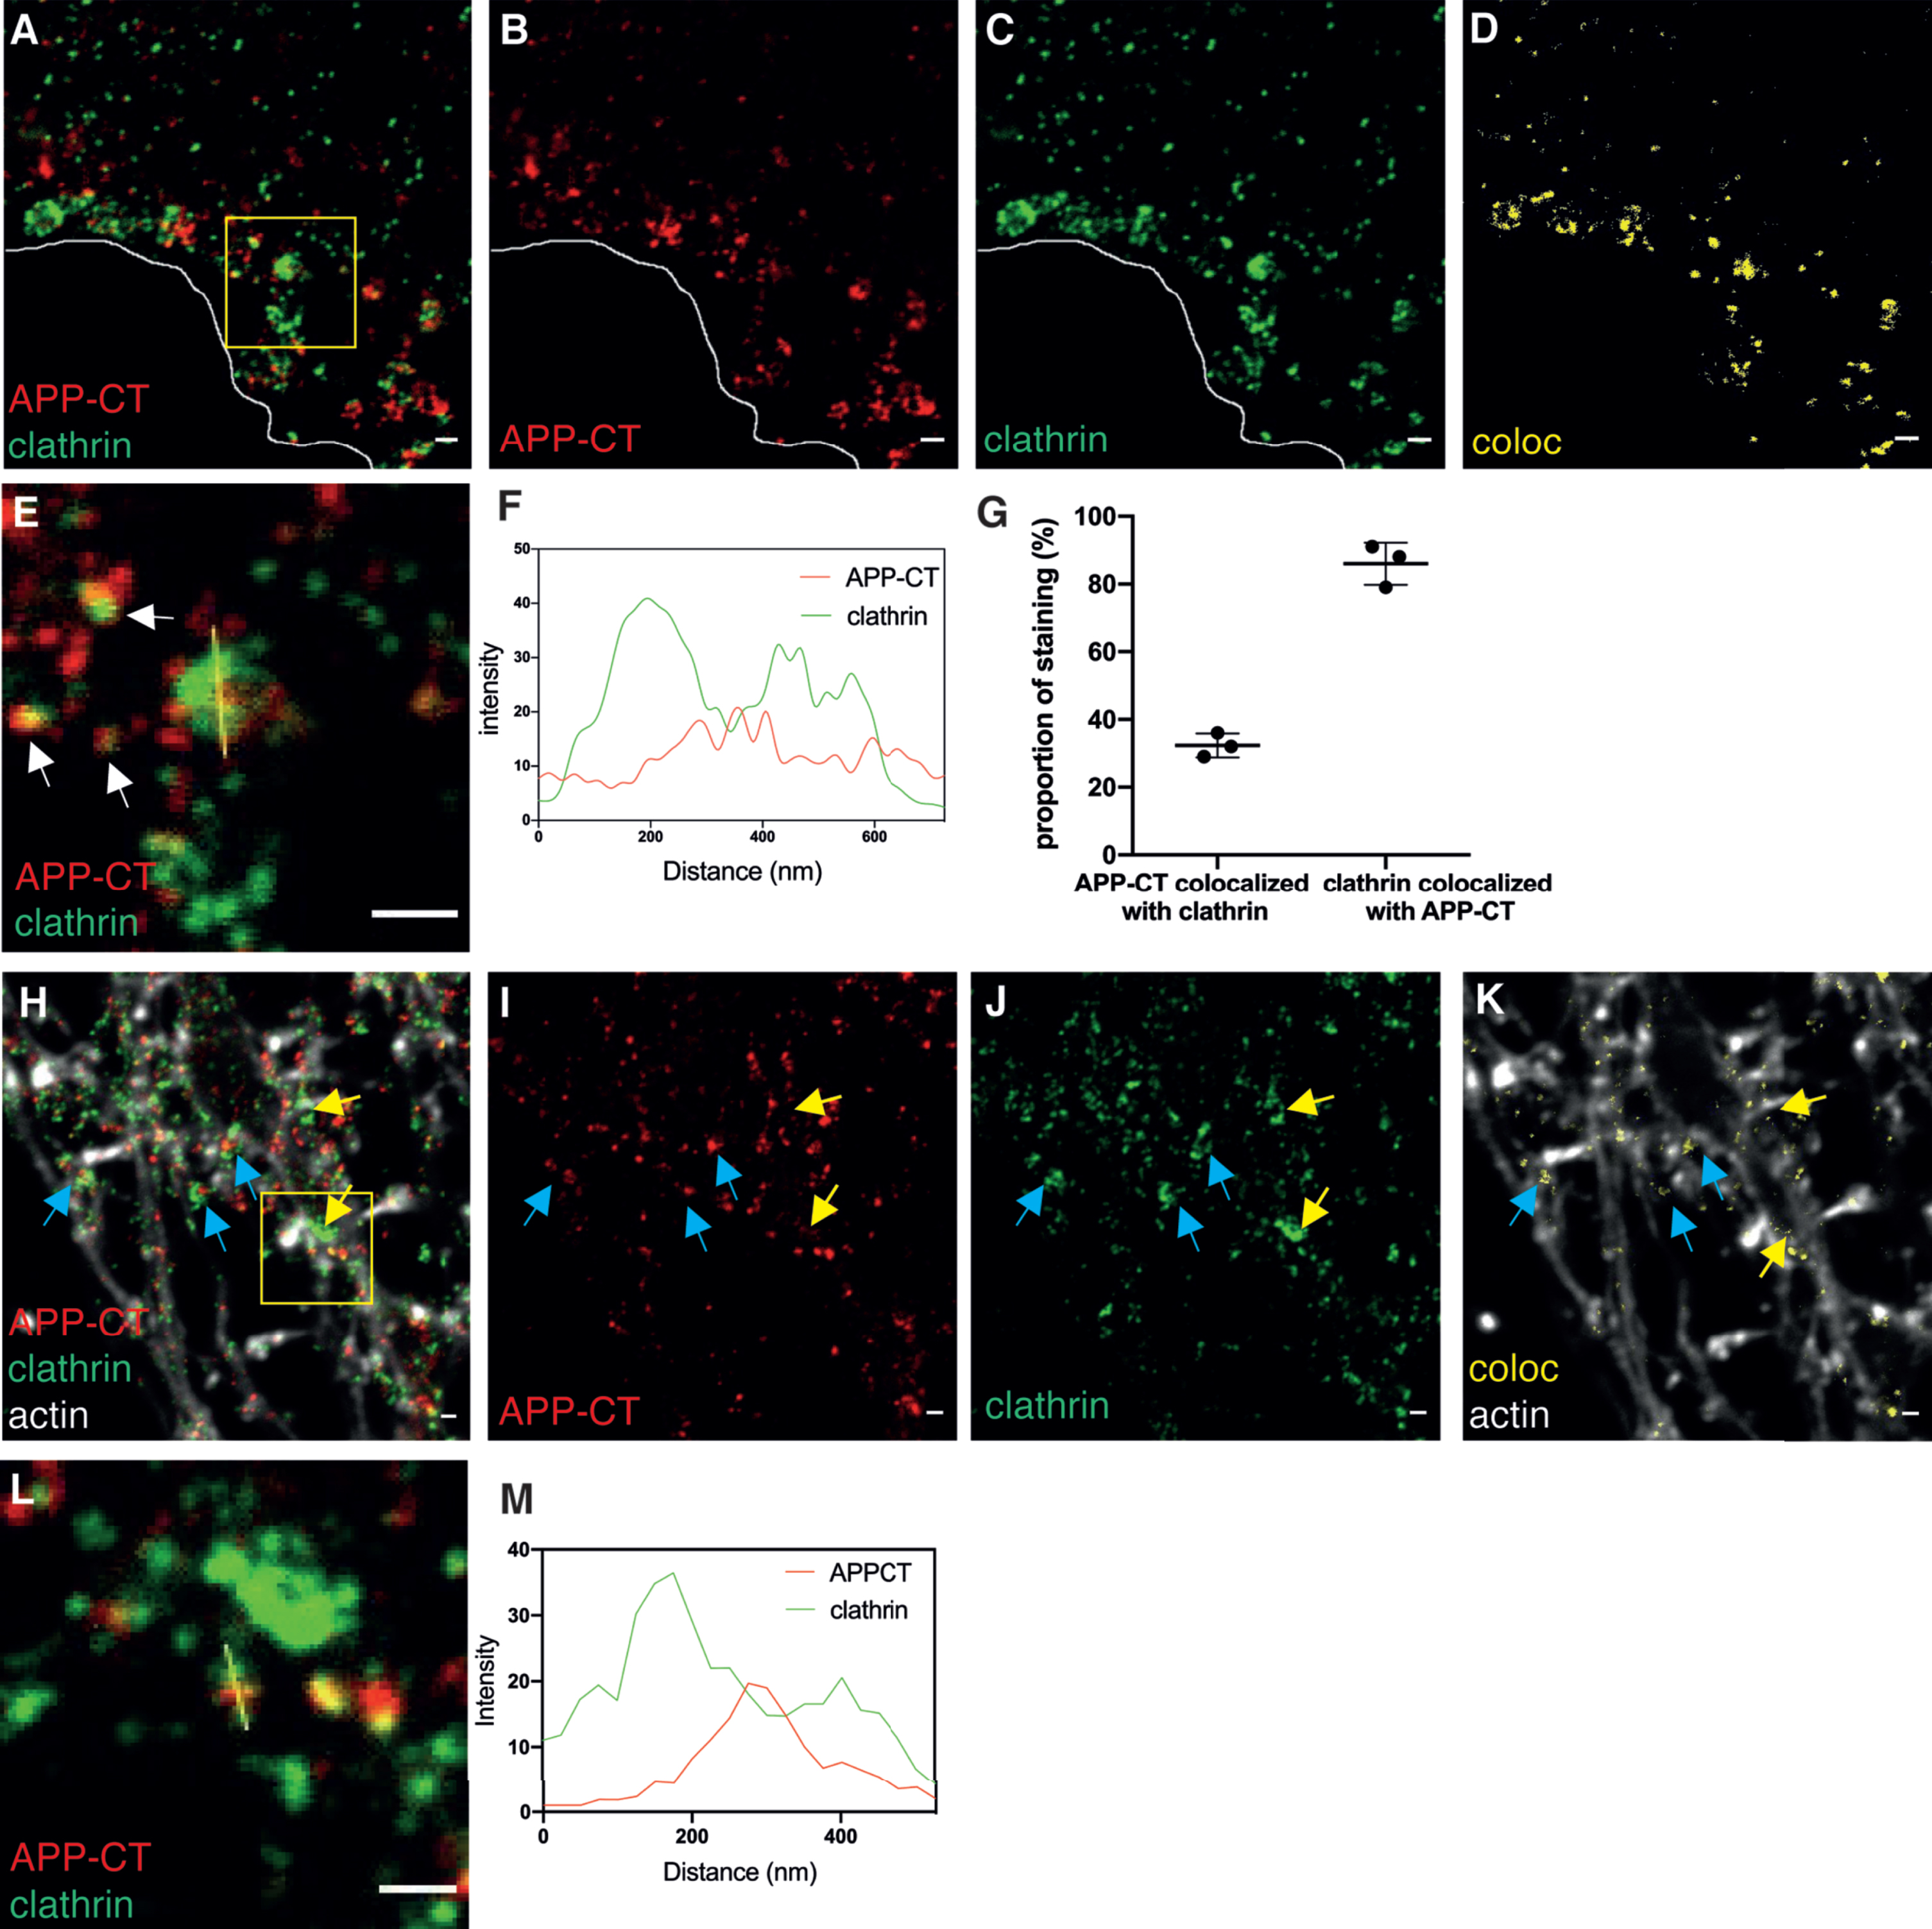 STED images of APP-CT in clathrin-coated pits and clathrin-coated vesicles in soma and neurites. Immunolabeling and 2-channel STED imaging was used to visualize the subcellular localization of APP-CT and clathrin in hippocampal neurons. A third, confocal, channel was used to image the actin cytoskeleton (phalloidin staining). Scale bar for all pictures: 500 nm. A-D) APP-CT (red) and clathrin (green) in soma. The border of the cell is marked in white. Images show, from left to right, A) both channels, B) APP-CT, and C) clathrin, respectively. D) The areas with colocalization of APP-CT and clathrin in (A) is shown in yellow. E) Zoomed-in image of the region marked with a yellow square in (A). Small vesicles with APP-CT staining partially colocalized with clathrin are marked with white arrows, while APP-CT enclosed by a coat of clathrin in a half-spherical shape is marked with a yellow line. F) Plot intensity analysis of the signal along the yellow line in (E). G) Percentage of total APP-CT staining in soma that colocalized with clathrin and of total clathrin staining in soma that colocalized with APP-CT. Data were quantified from 3 samples, cultured from different batches of mice embryos. All error bars represent mean±sd. Analysis was done by “particle analyze” in ImageJ. Threshould “Moments” was applied for the Aβ42 channel. Threshould “Triangle” was applied for the clathrin channel. H-J) APP-CT (red) and clathrin (green) in neurites, combined with actin staining in white to show the outline of the neurites (the latter imaged by confocal microscopy). Images show, from left to right, H) all channels, I) APP-CT, and J) clathrin. Some spots of colocalization for APP-CT and clathrin are marked with blue arrows, while structures containing clathrin but not APP-CT are marked with yellow arrows. K) Colocalization of APP-CT and clathrin are shown in yellow. L) Zoomed-in image of the structure marked by the yellow square in (H). The brightness was increased by ImageJ in order to see the weak signal. M) Plot intensity analysis of the signal along the yellow line in (L).